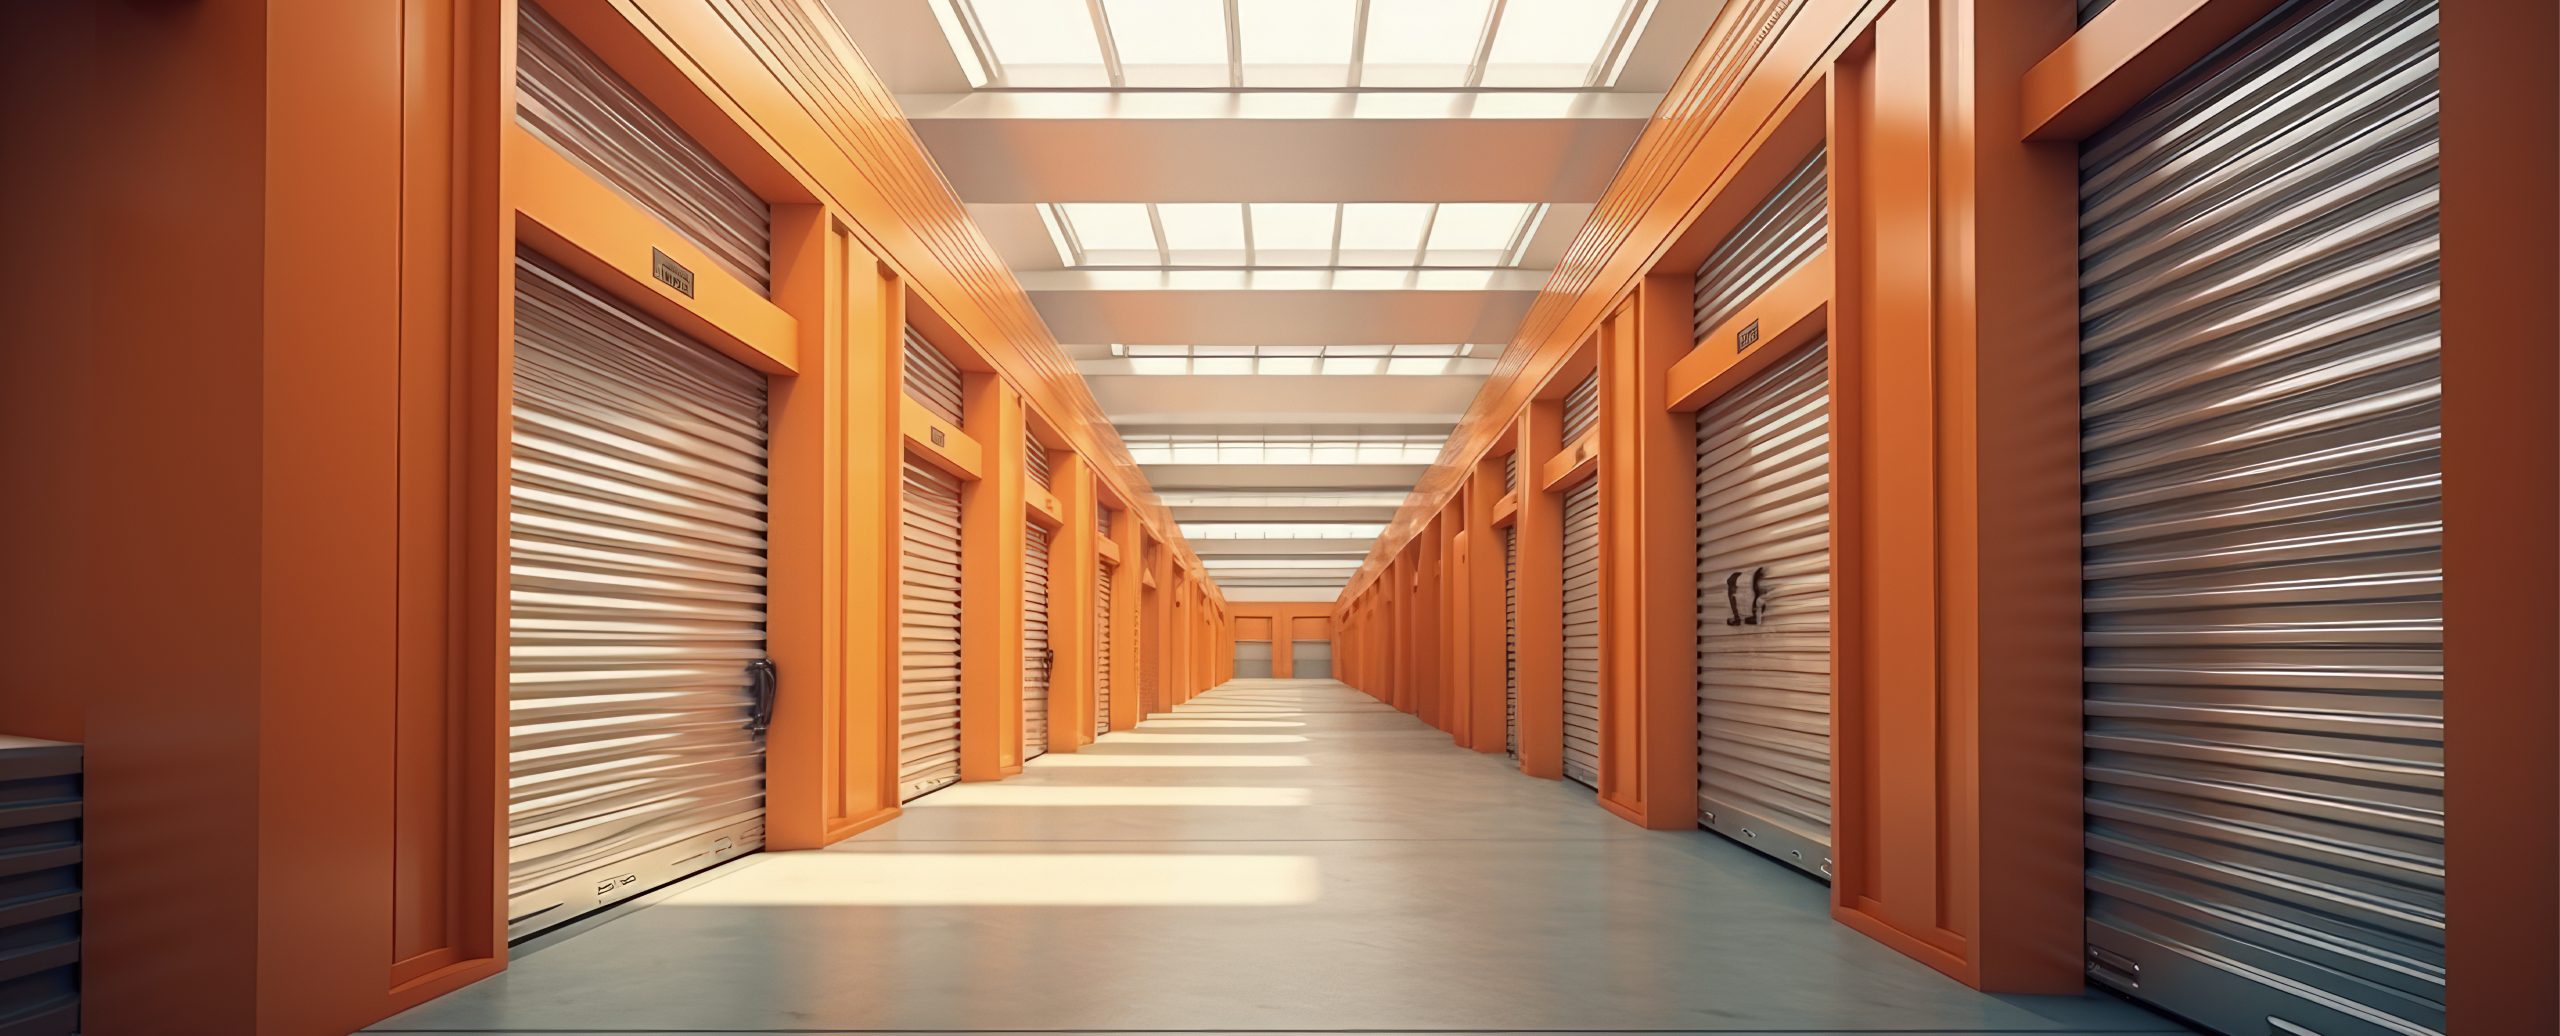 4 Trends in the Self Storage Industry